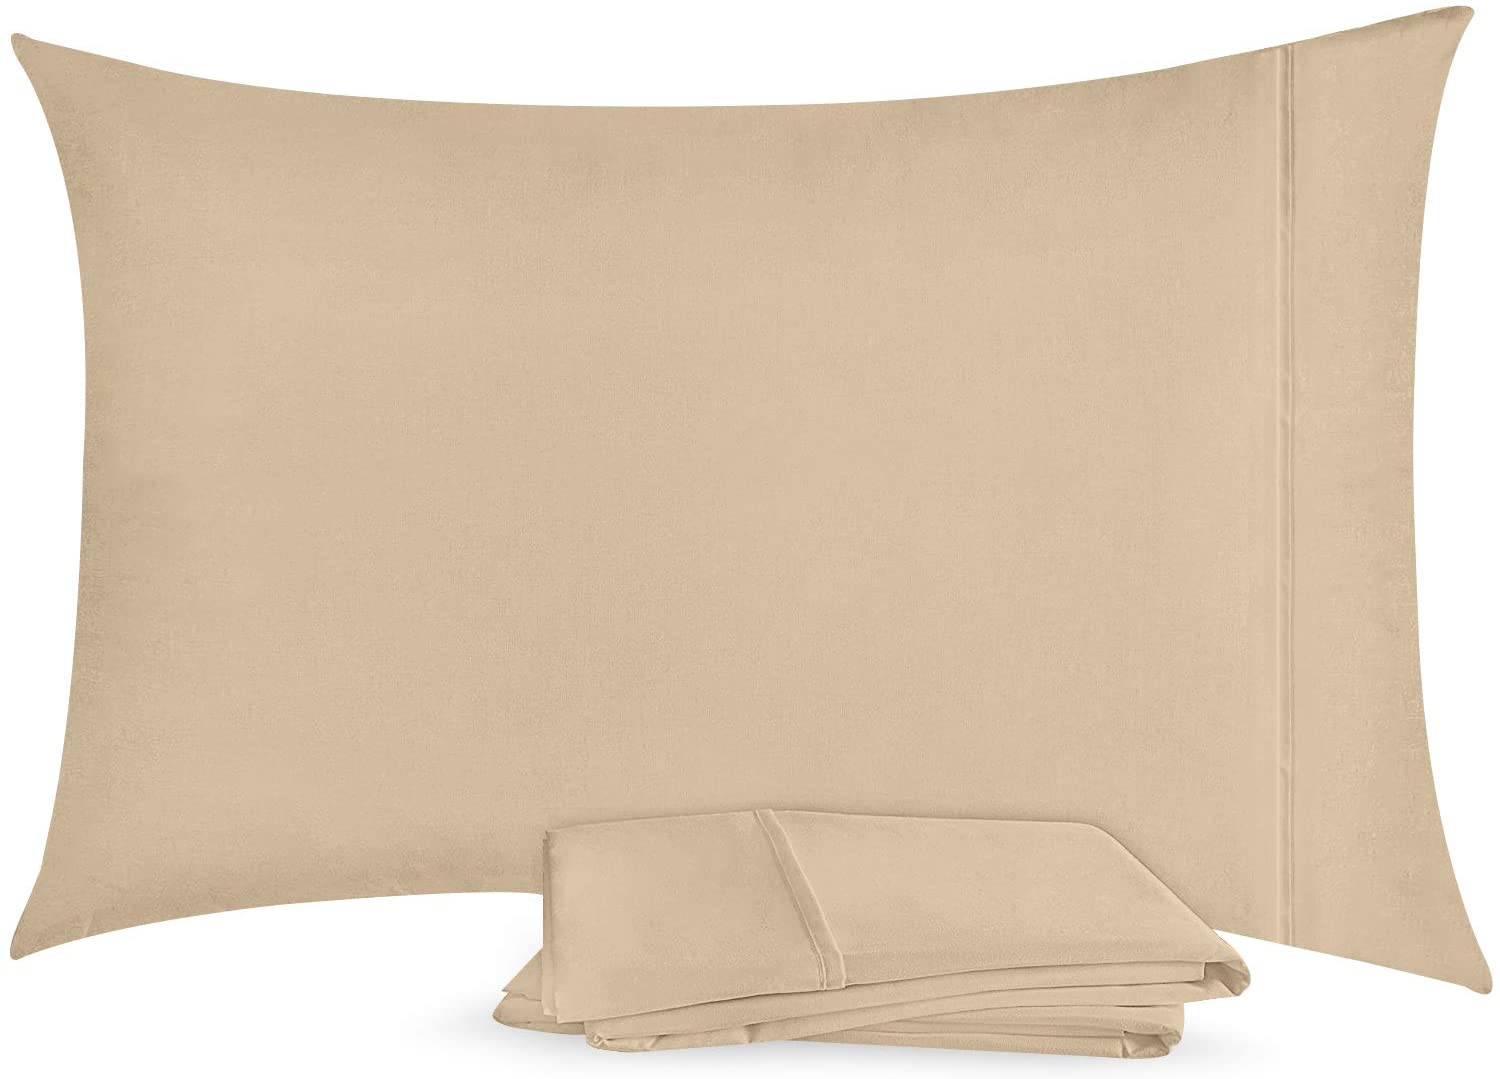 Pillowcases 2 Pack Envelope Closure Soft Brushed Microfiber Fabric Pillow Covers Fast Forward